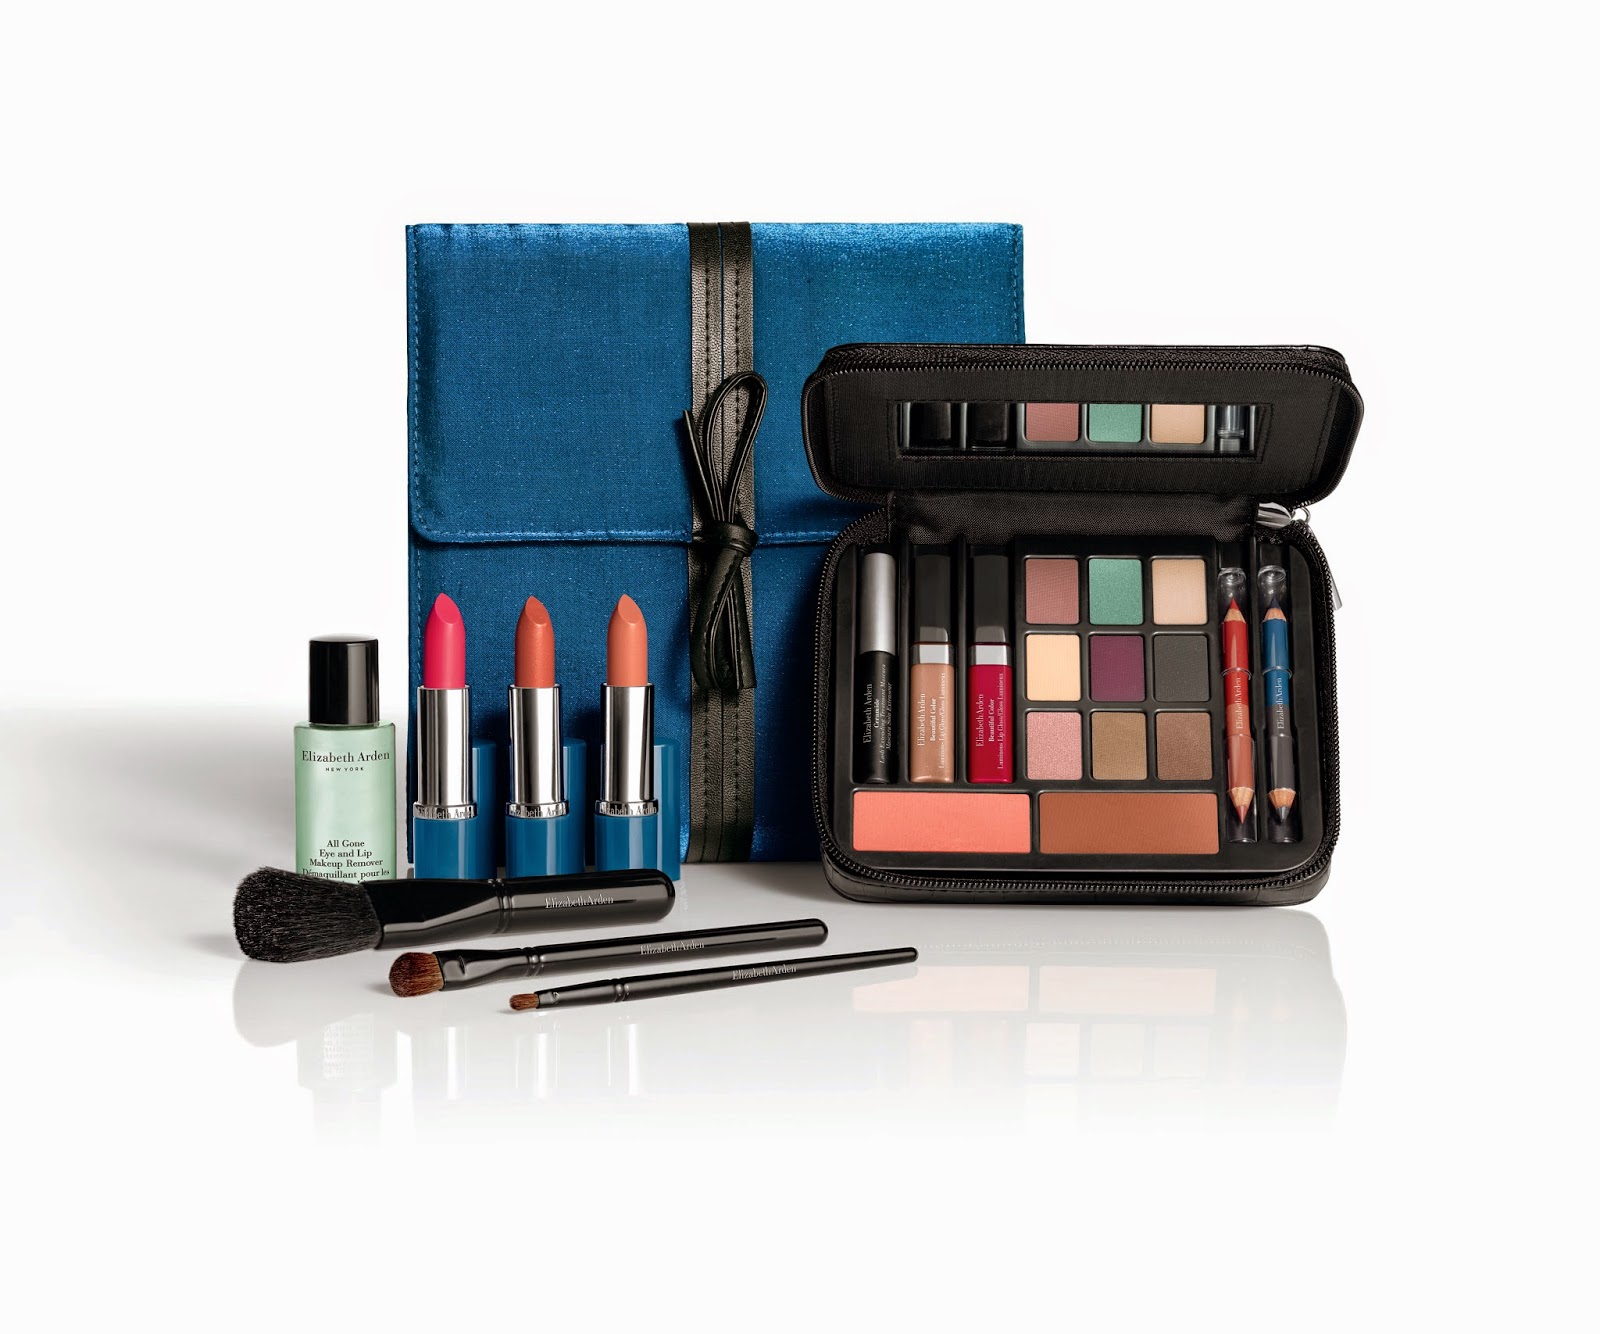 MOTHER'S DAY GIFT IDEAS FROM ELIZABETH ARDEN - MAKEUP BLOCKBUSTER The Beauty & Lifestyle Hunter